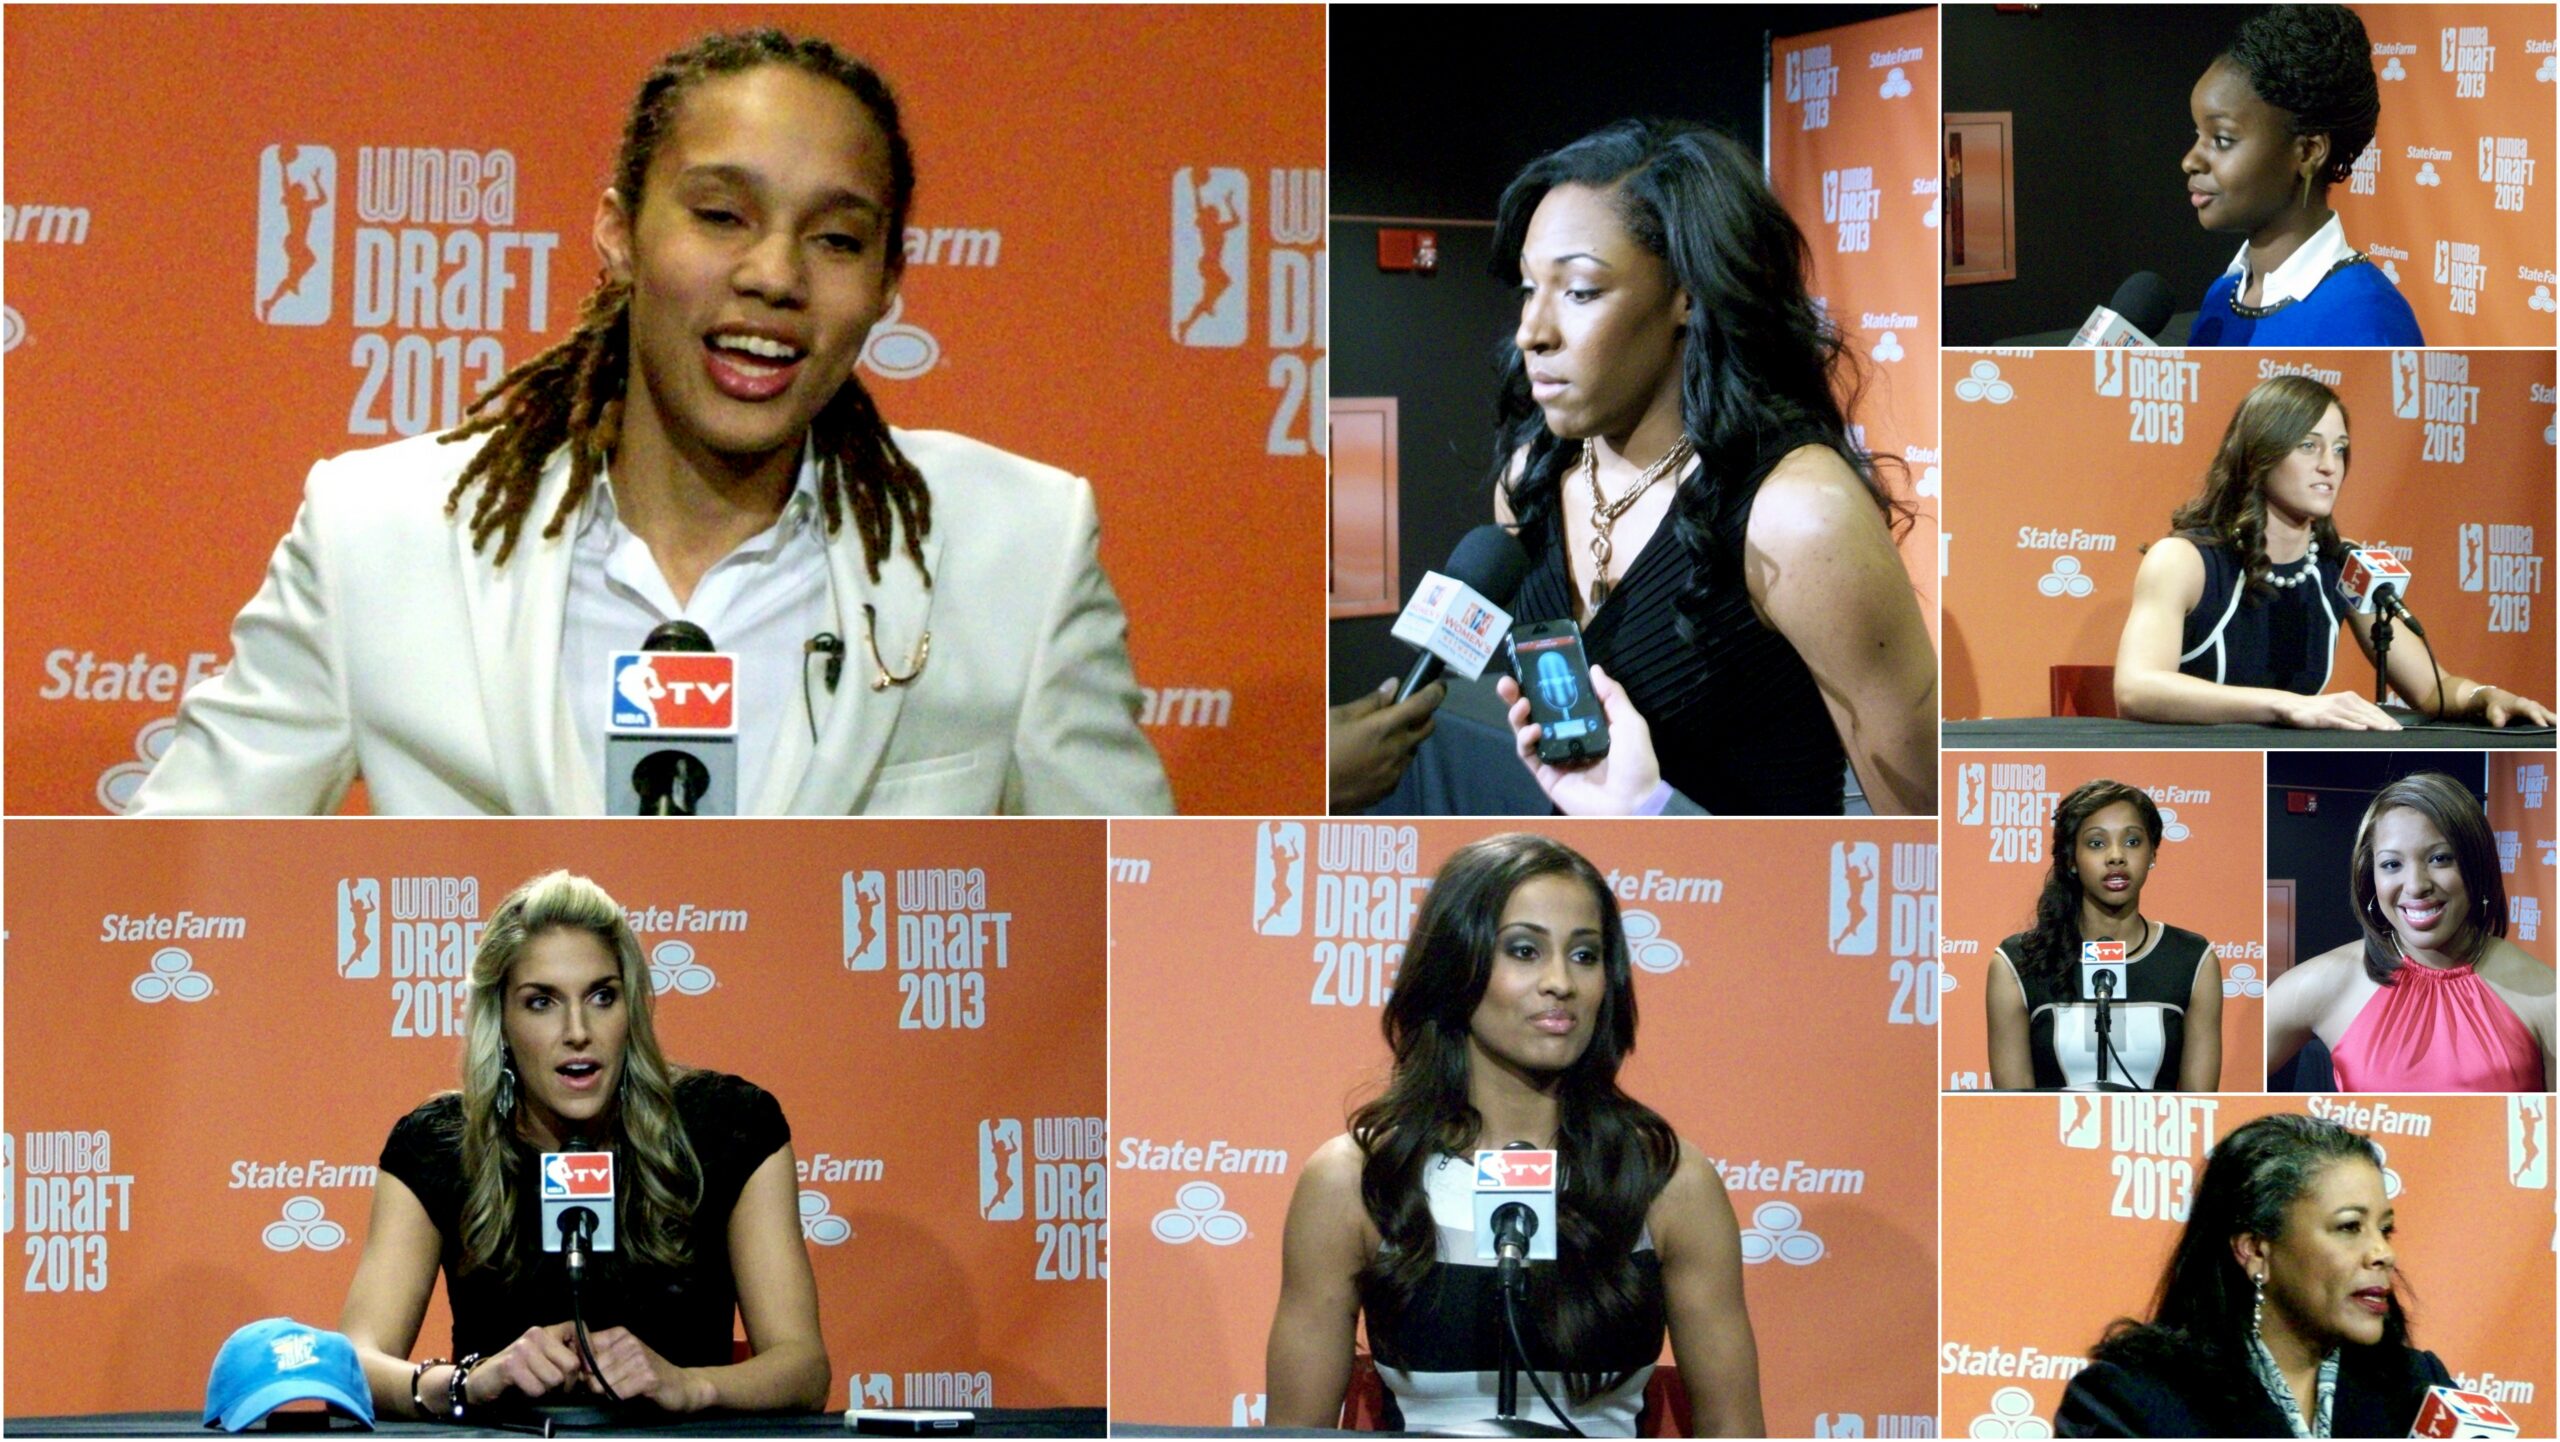 Dishin & Swishin 4/18/13 Podcast: The WNBA class of 2013, there may be three to see, but there’s a lot more to adore!